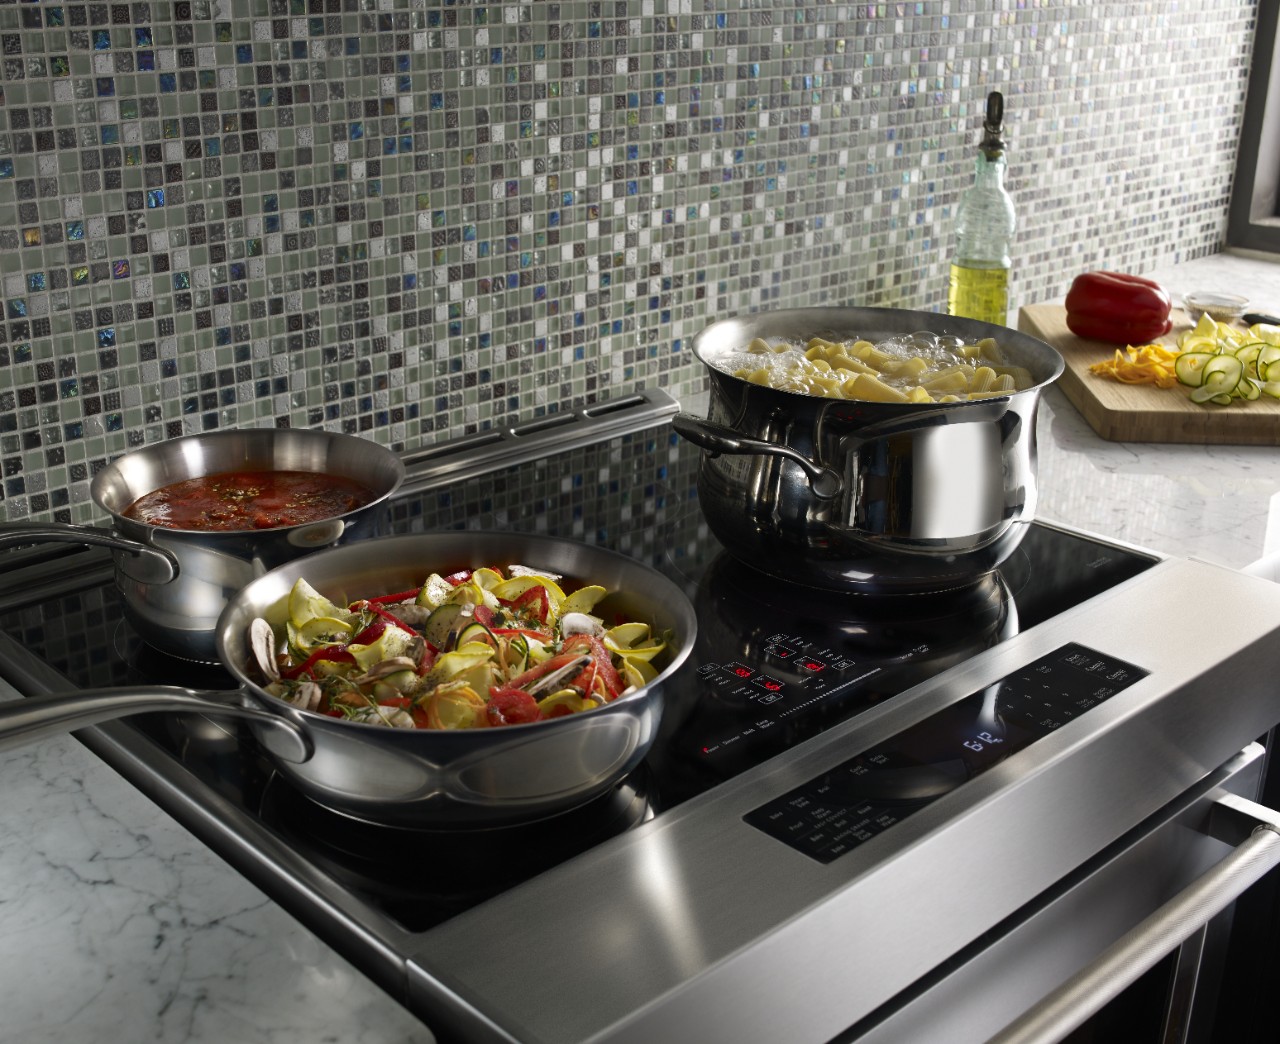 Most KitchenAid® cookware features stainless steel bases for optimal performance.